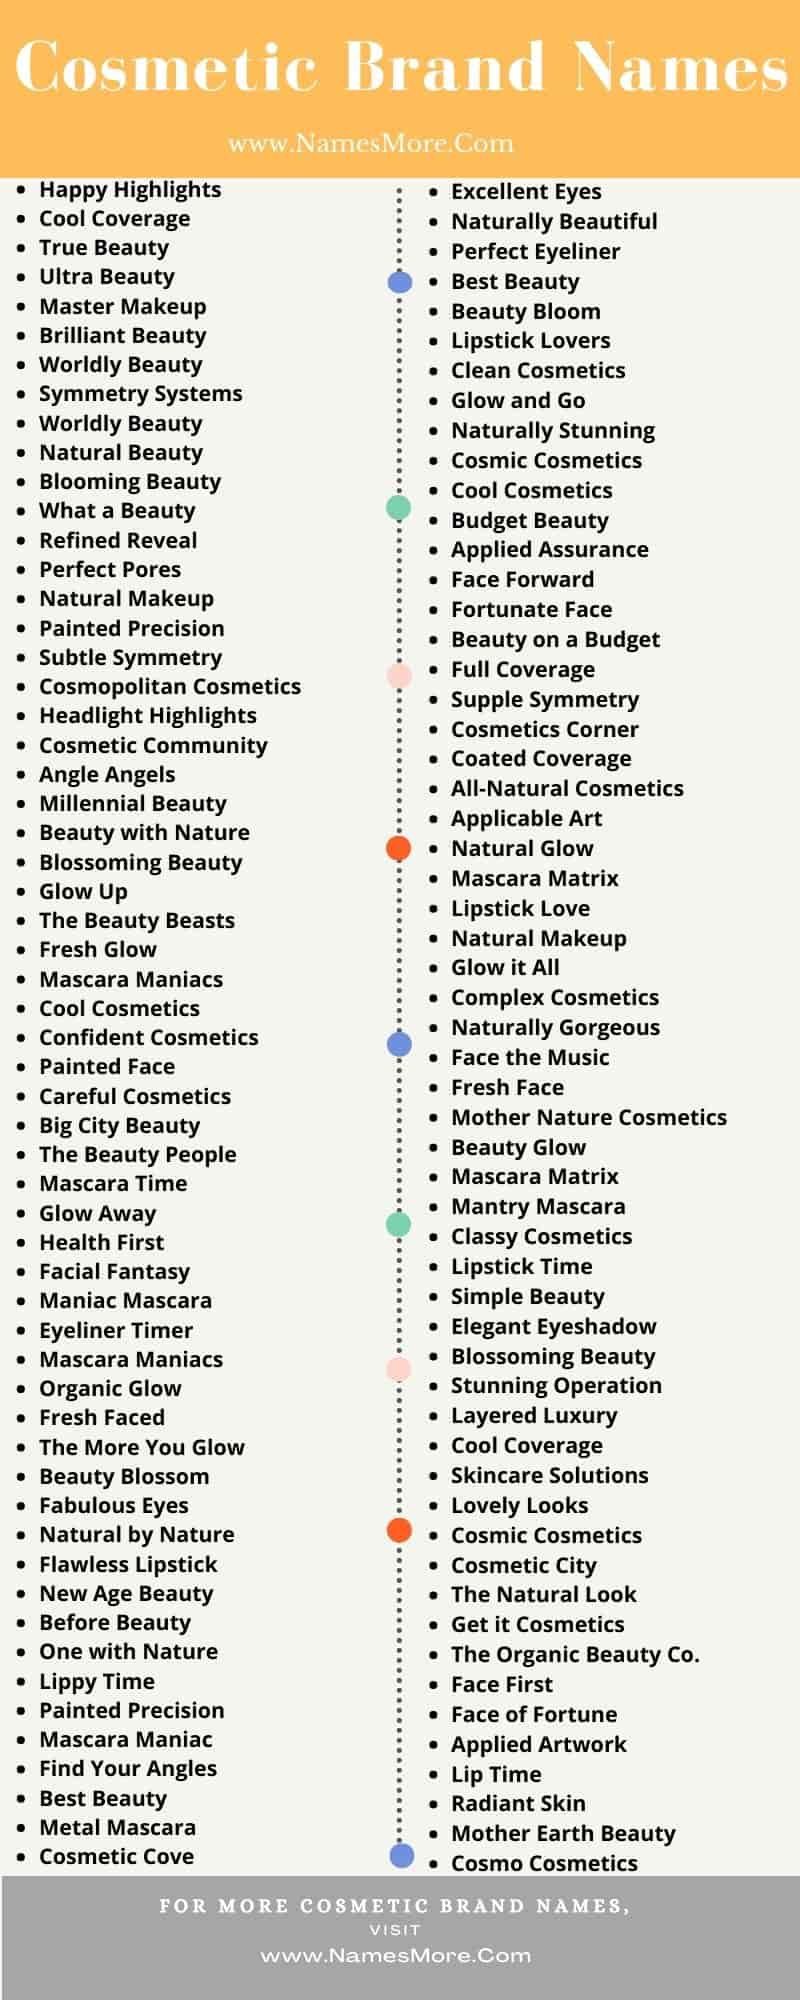 1600+ Cosmetic Brand Names [Cool, Cute & Best] List Infographic